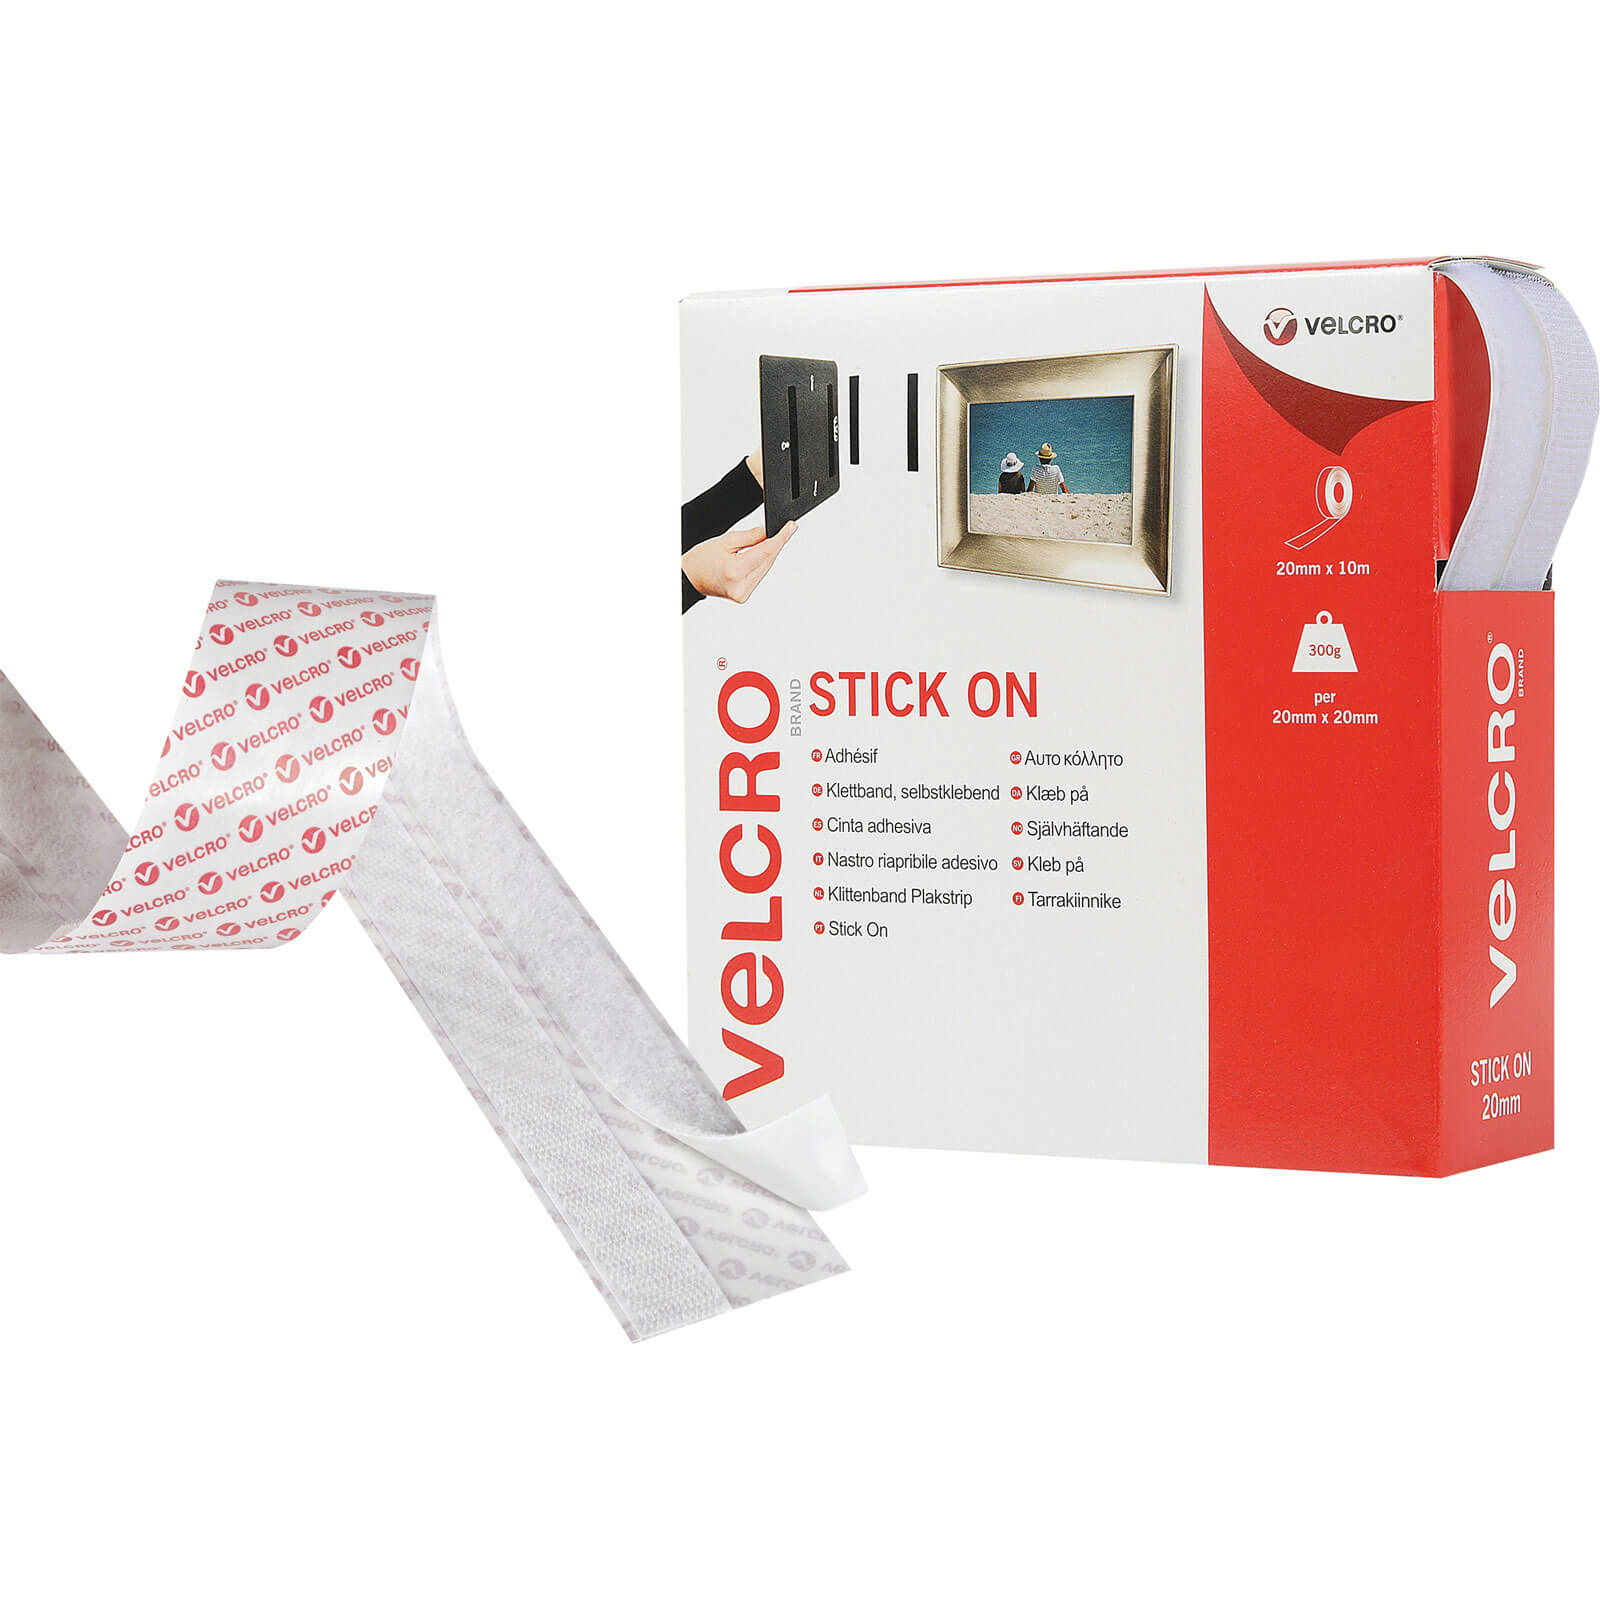 Photo of Velcro Stick On Tape White 20mm 10m Pack Of 1